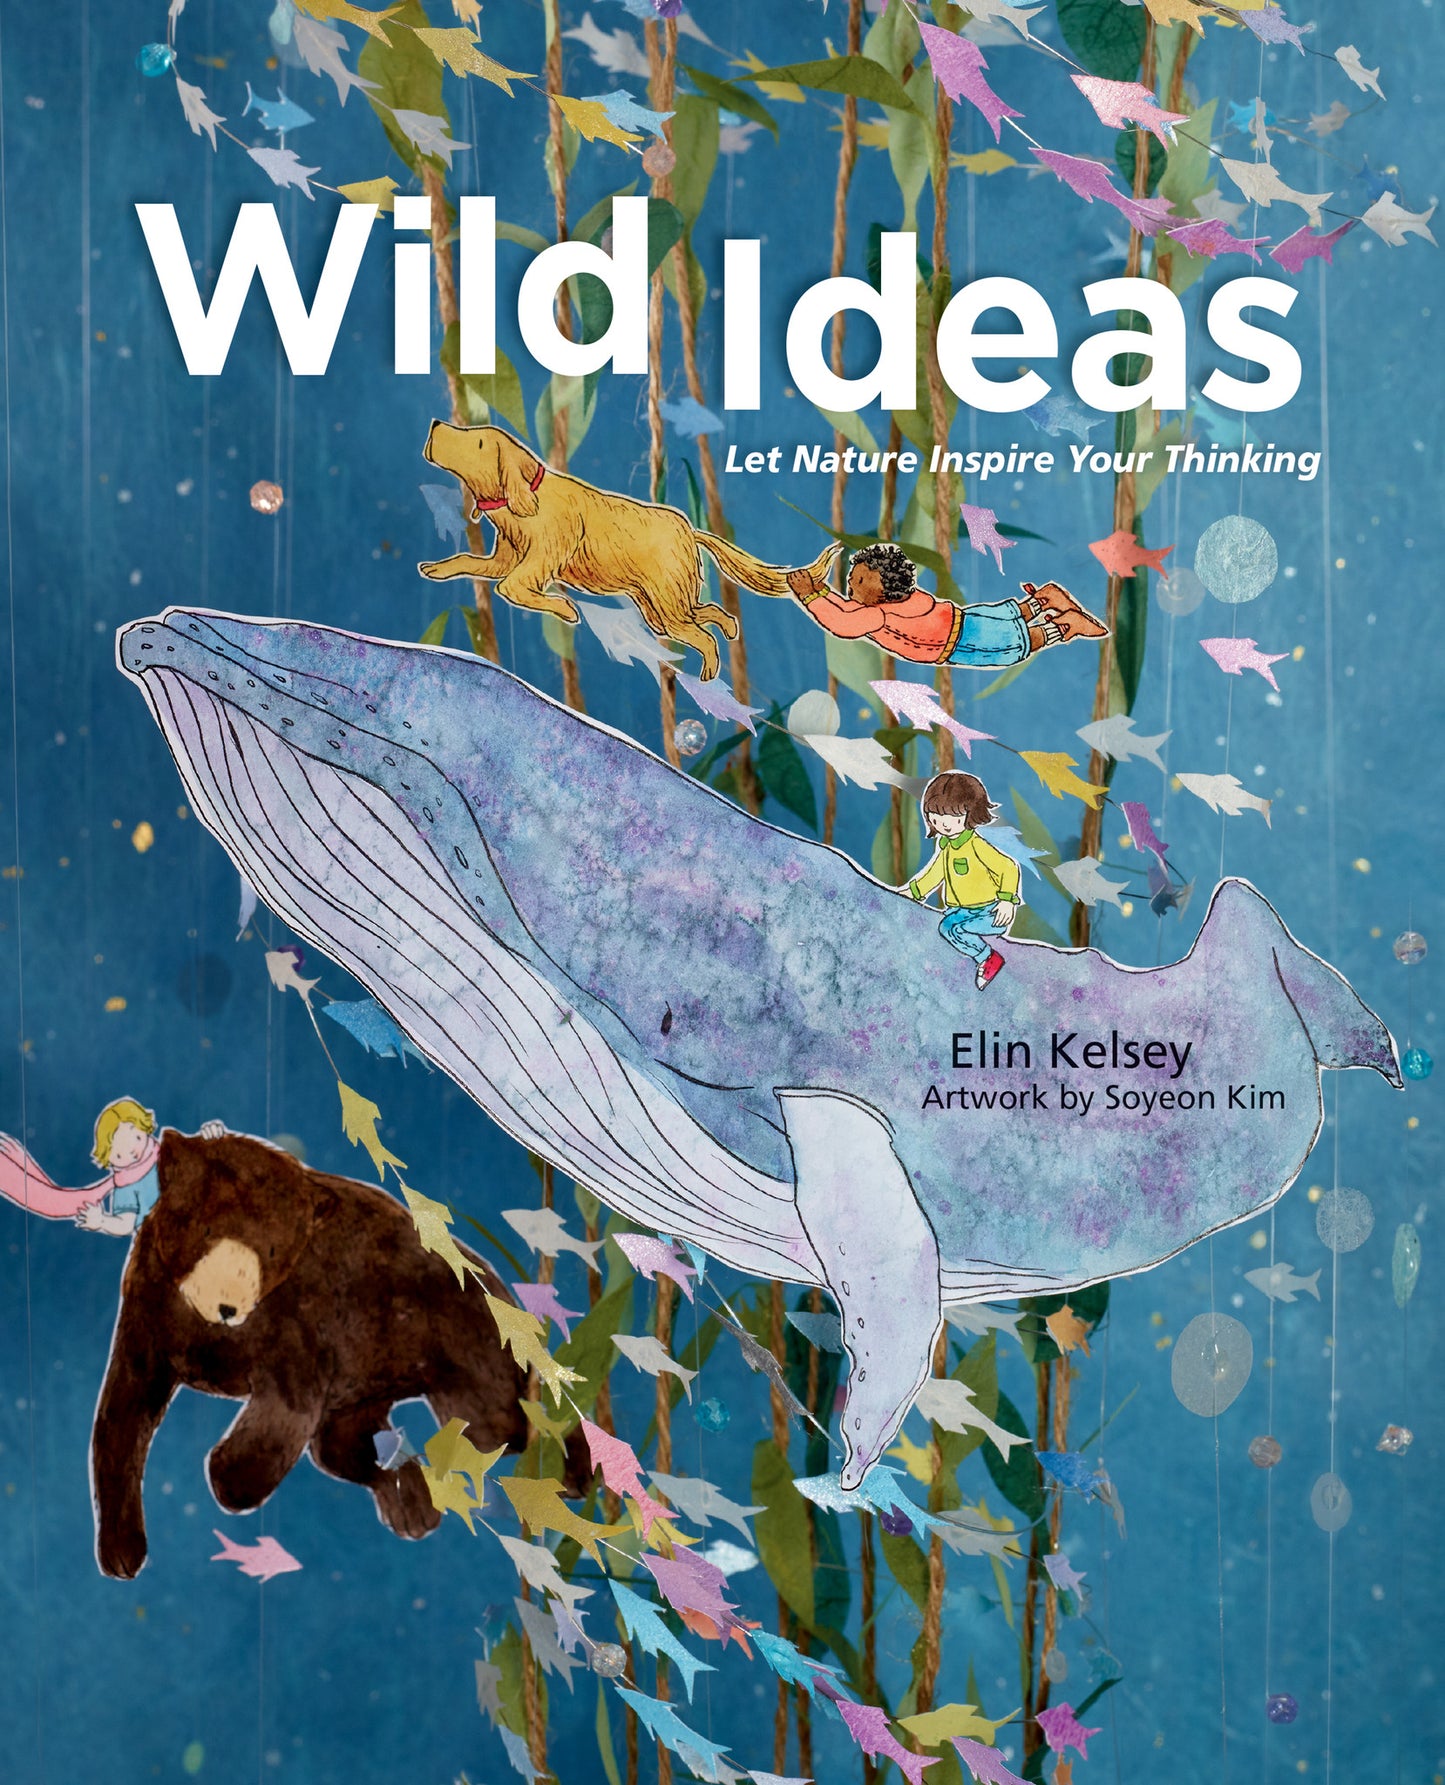 Wild Ideas - Owlkids - Reading for kids and literacy resources for parents made fun. Books helping kids to learn.